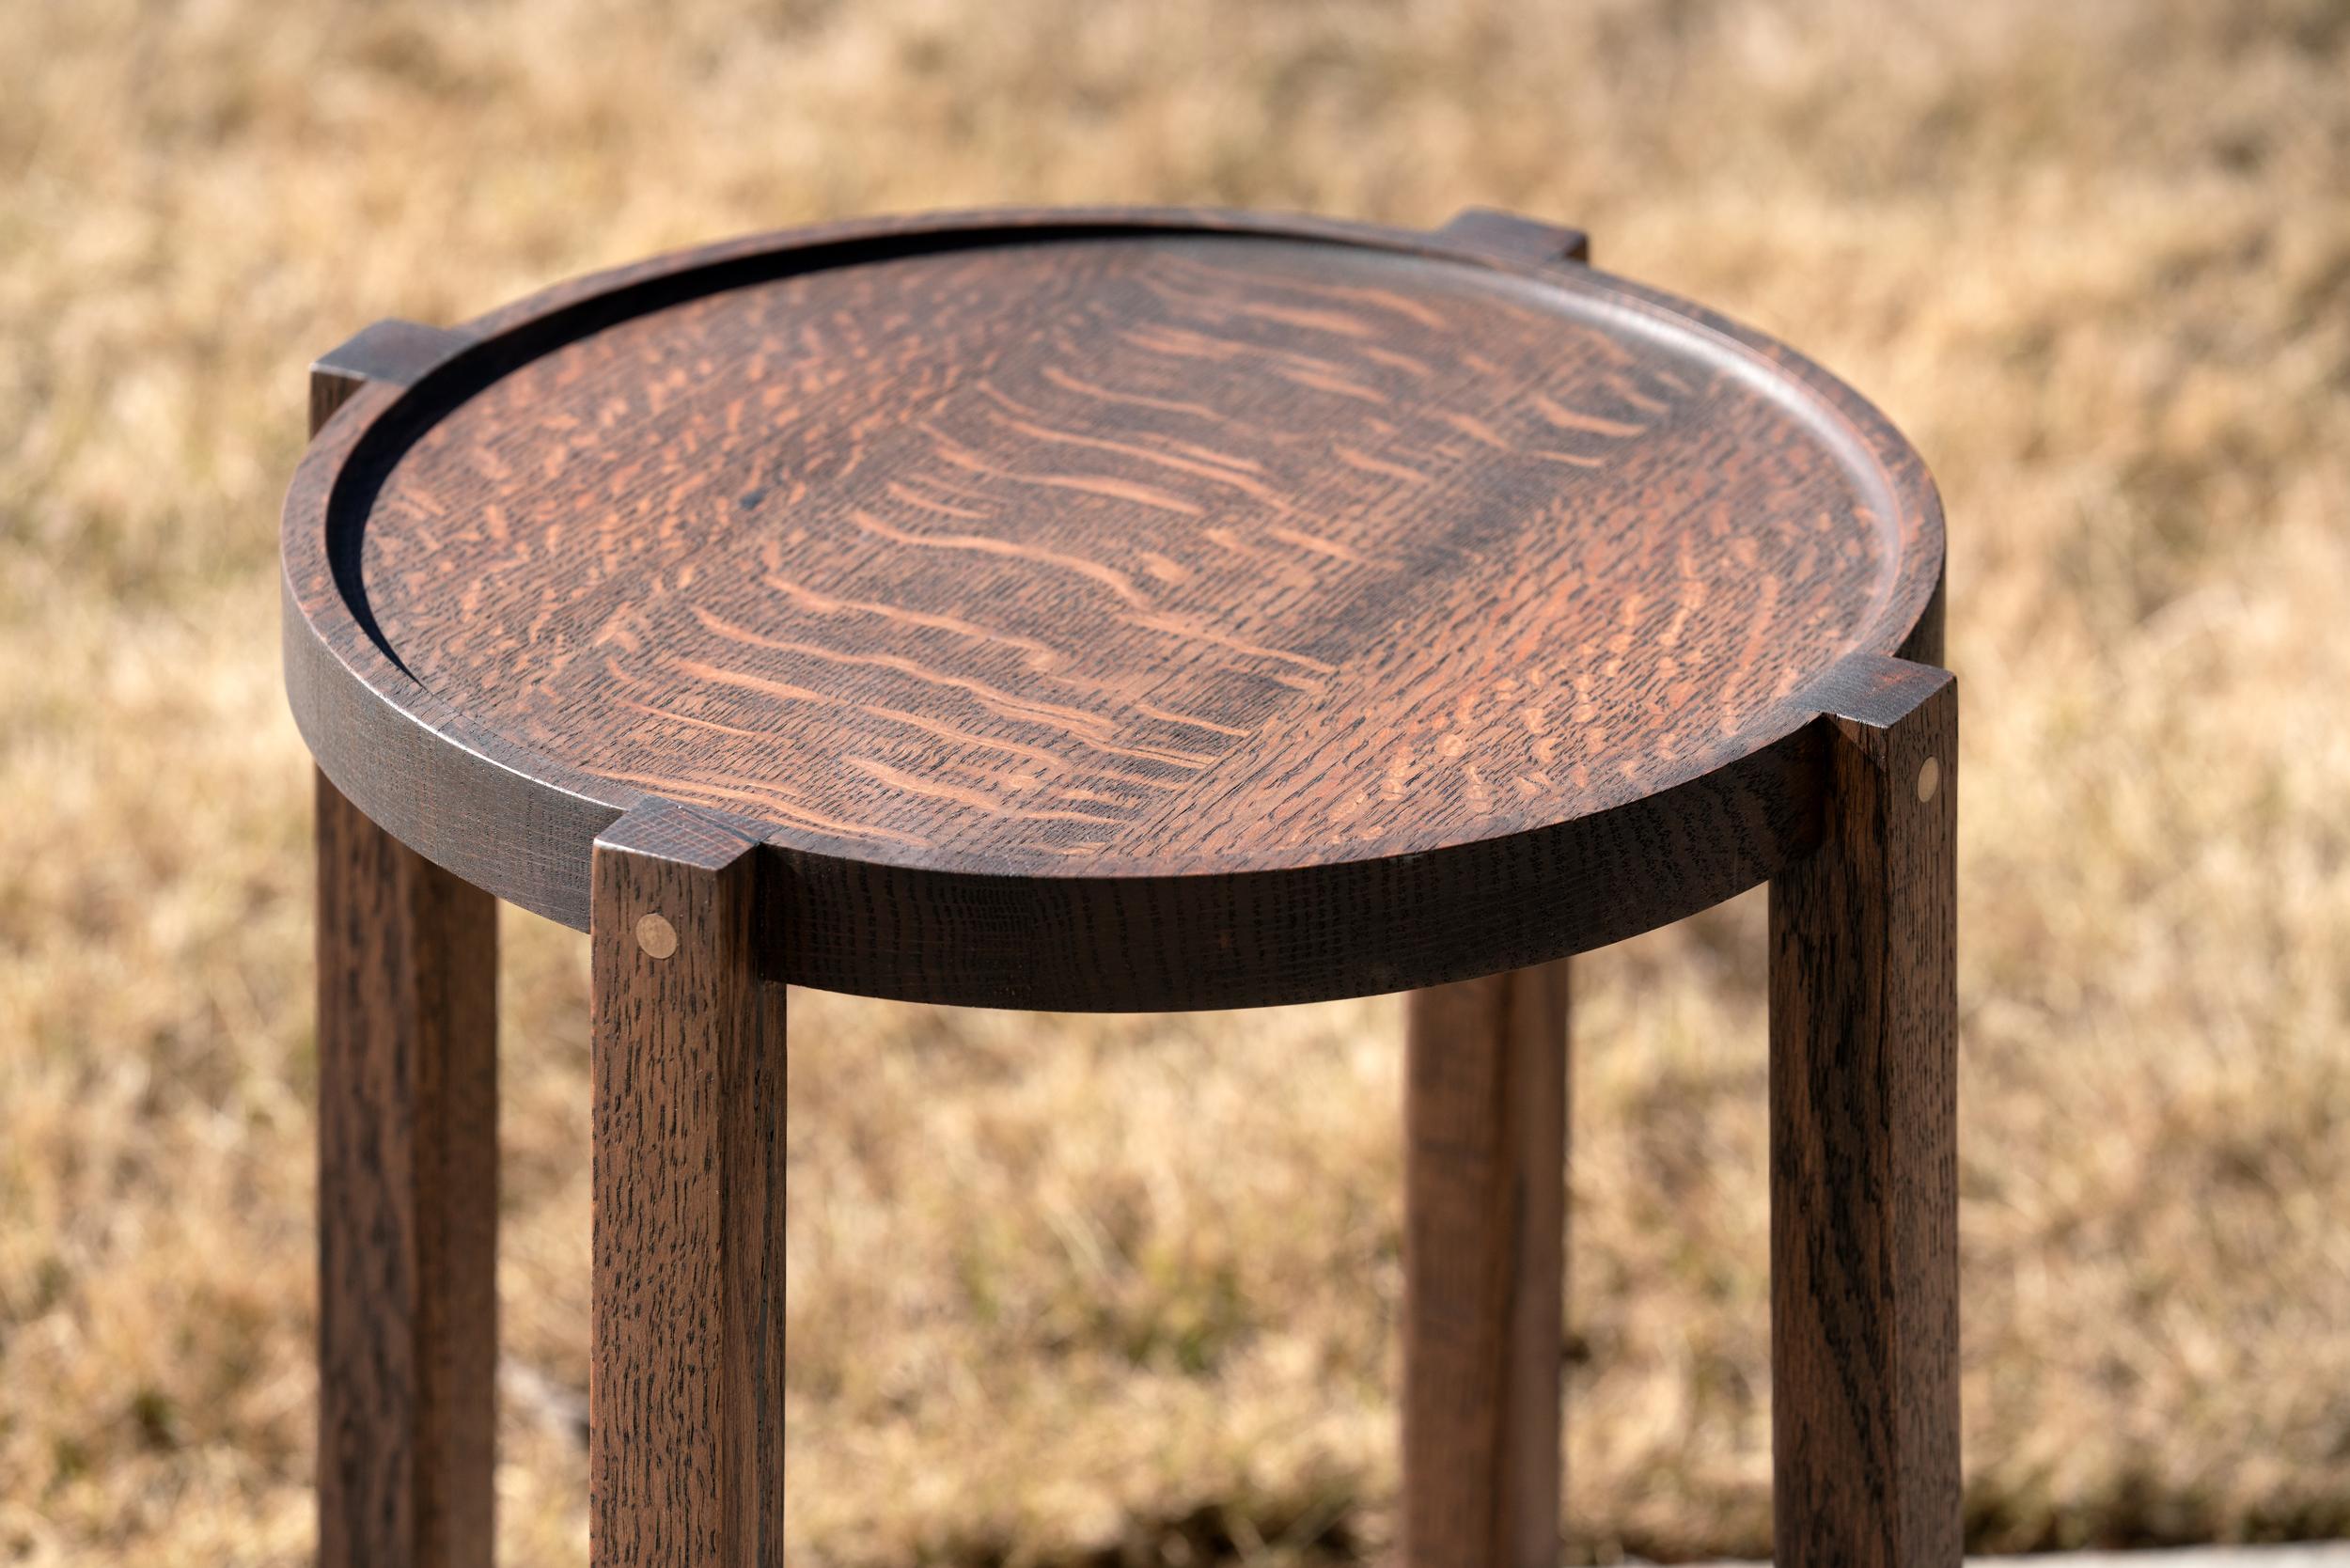 We call this round side table black oak with bronze details the Waverly table. This table is made of the finest repurposed urban timber and is so versatile. Sturdy yet lightweight, the Waverly can be easily moved around as a martini table or place